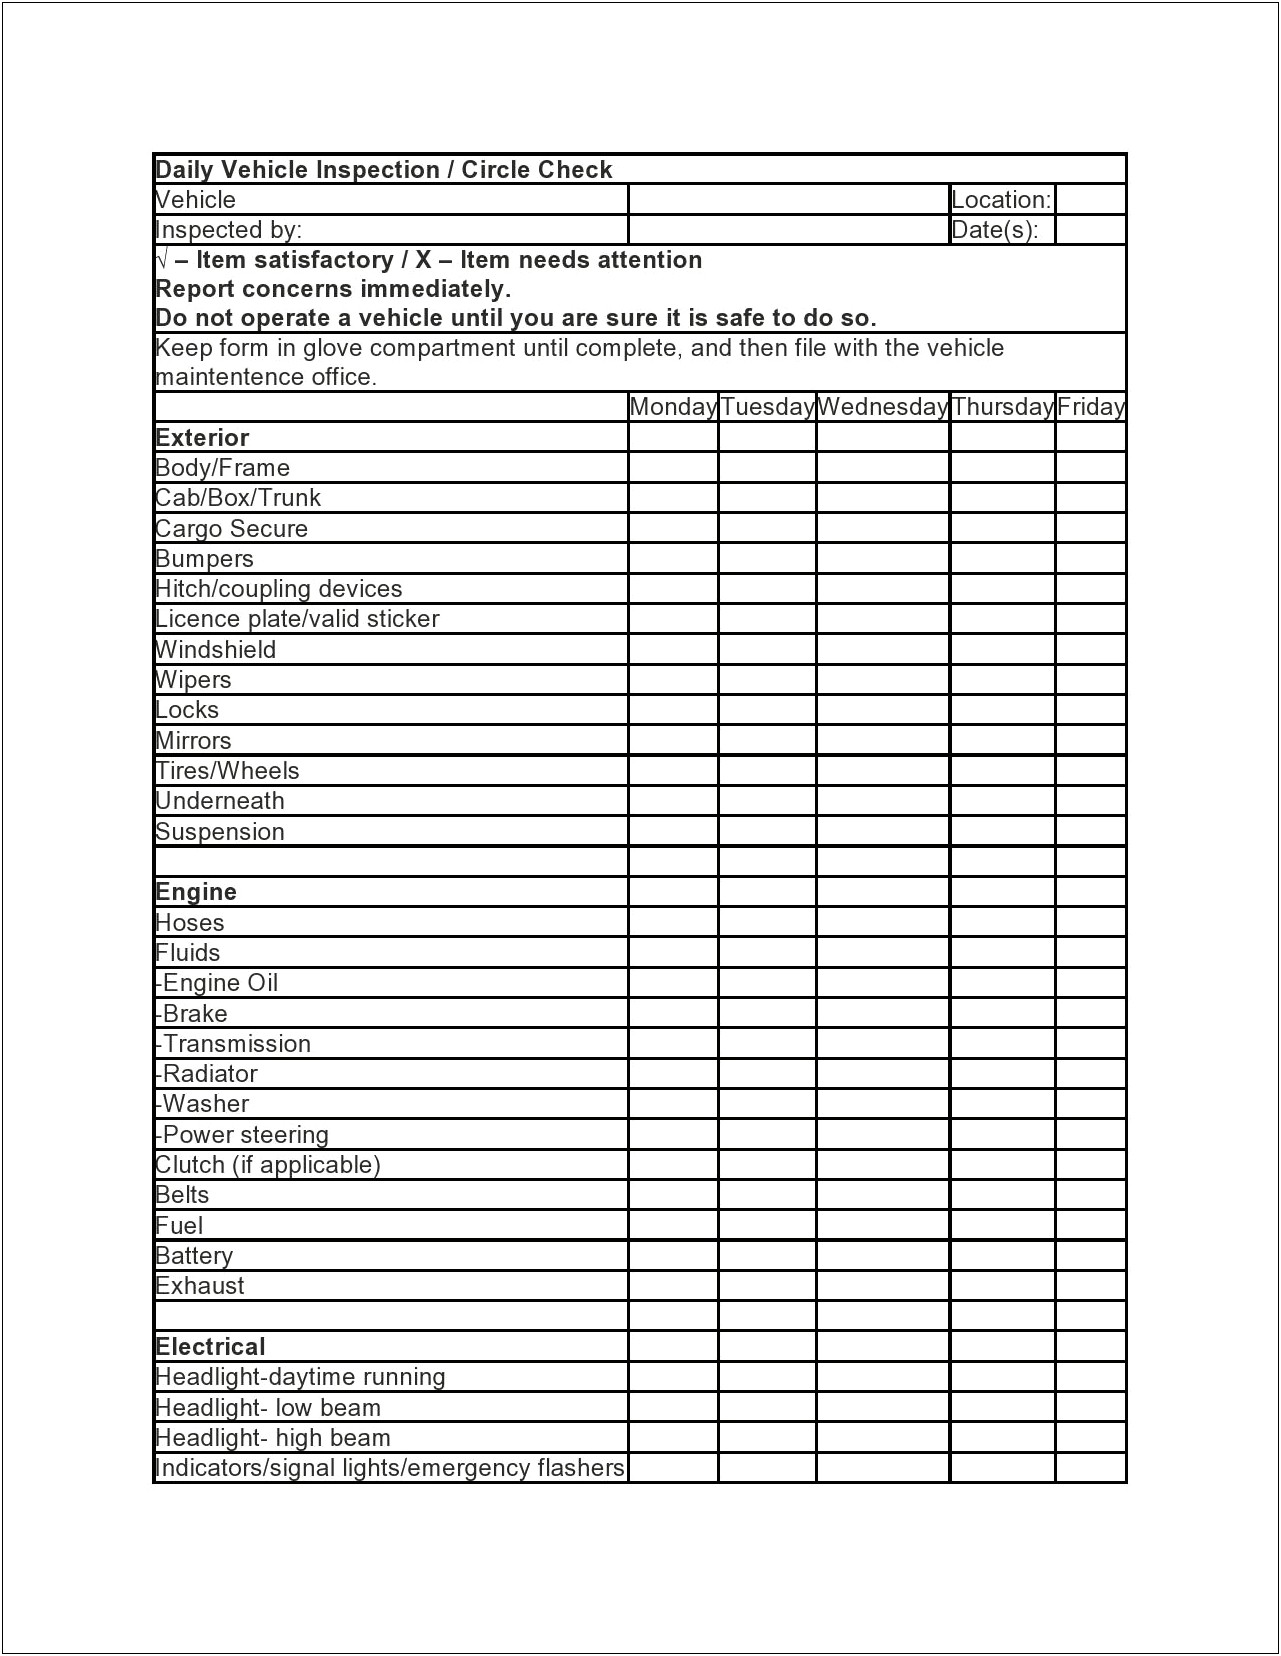 Daily Vehicle Inspection Checklist Template Free